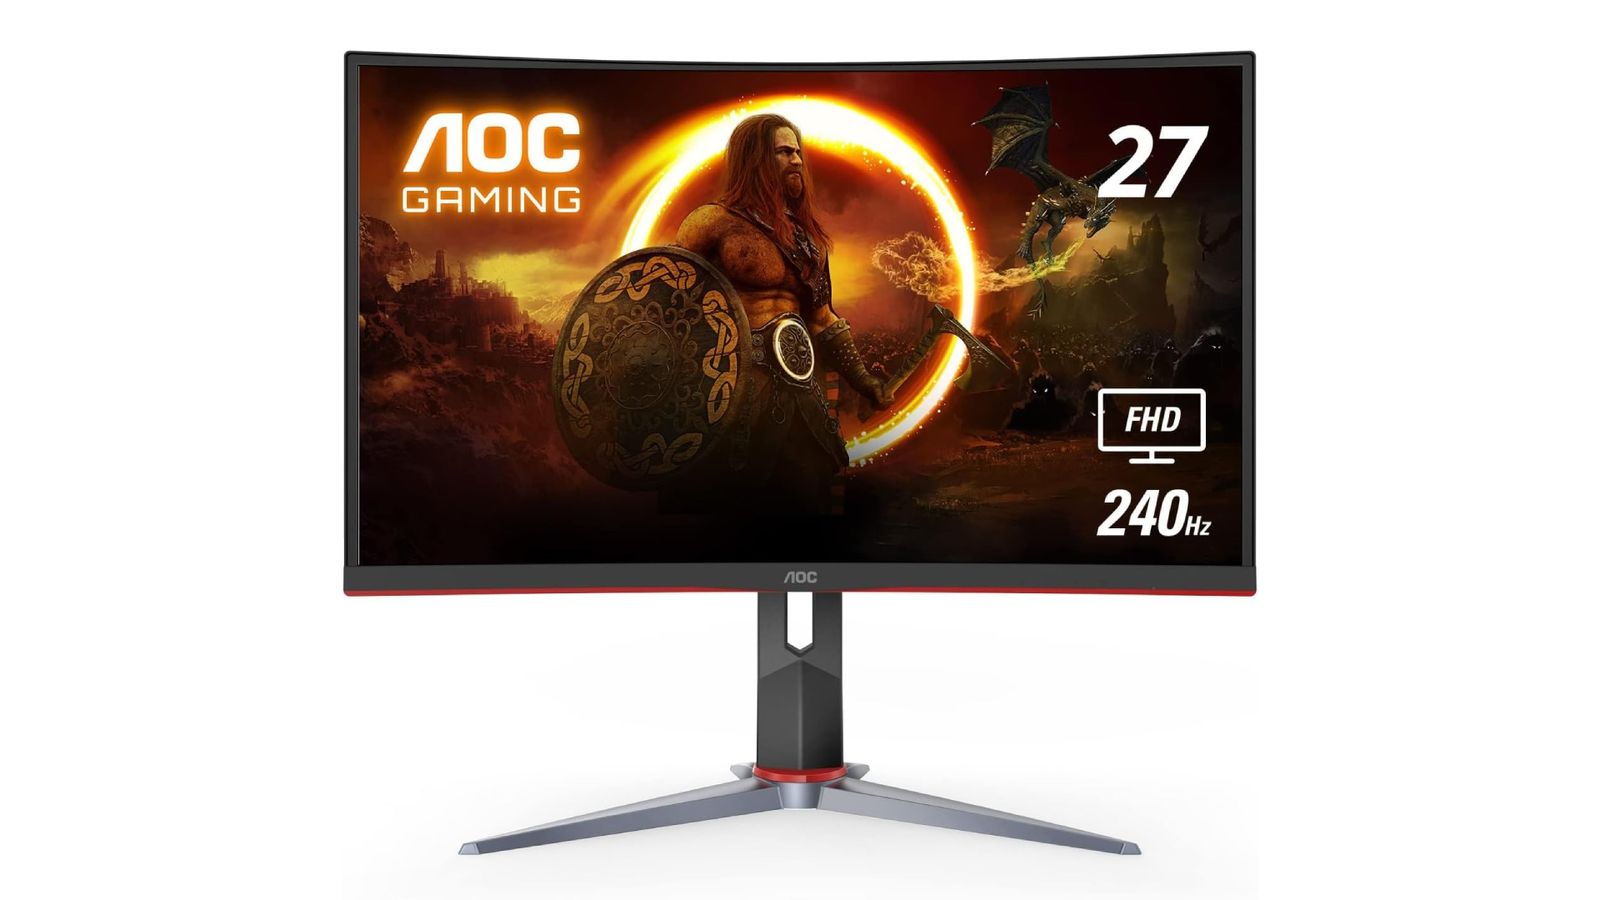 AOC C27G2Z product image of a dark grey monitor with red trim featuring a long-haired warrior on the display.